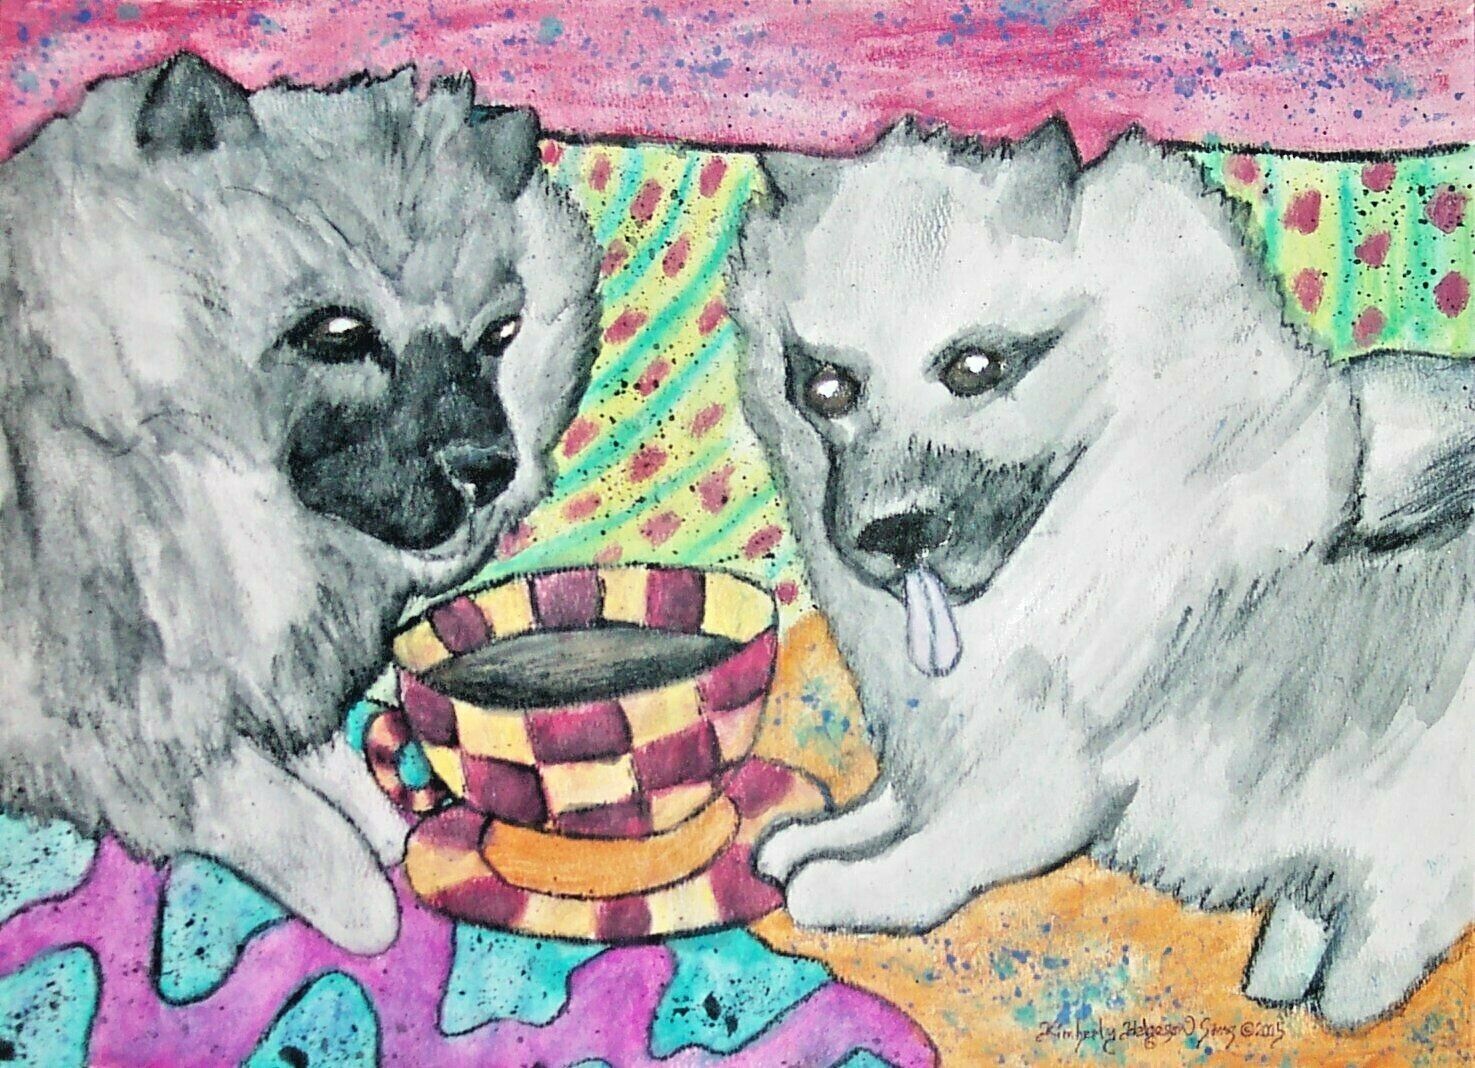 Keeshond Collectible 11x14 Art Print Drinking Coffee by Artist KSams